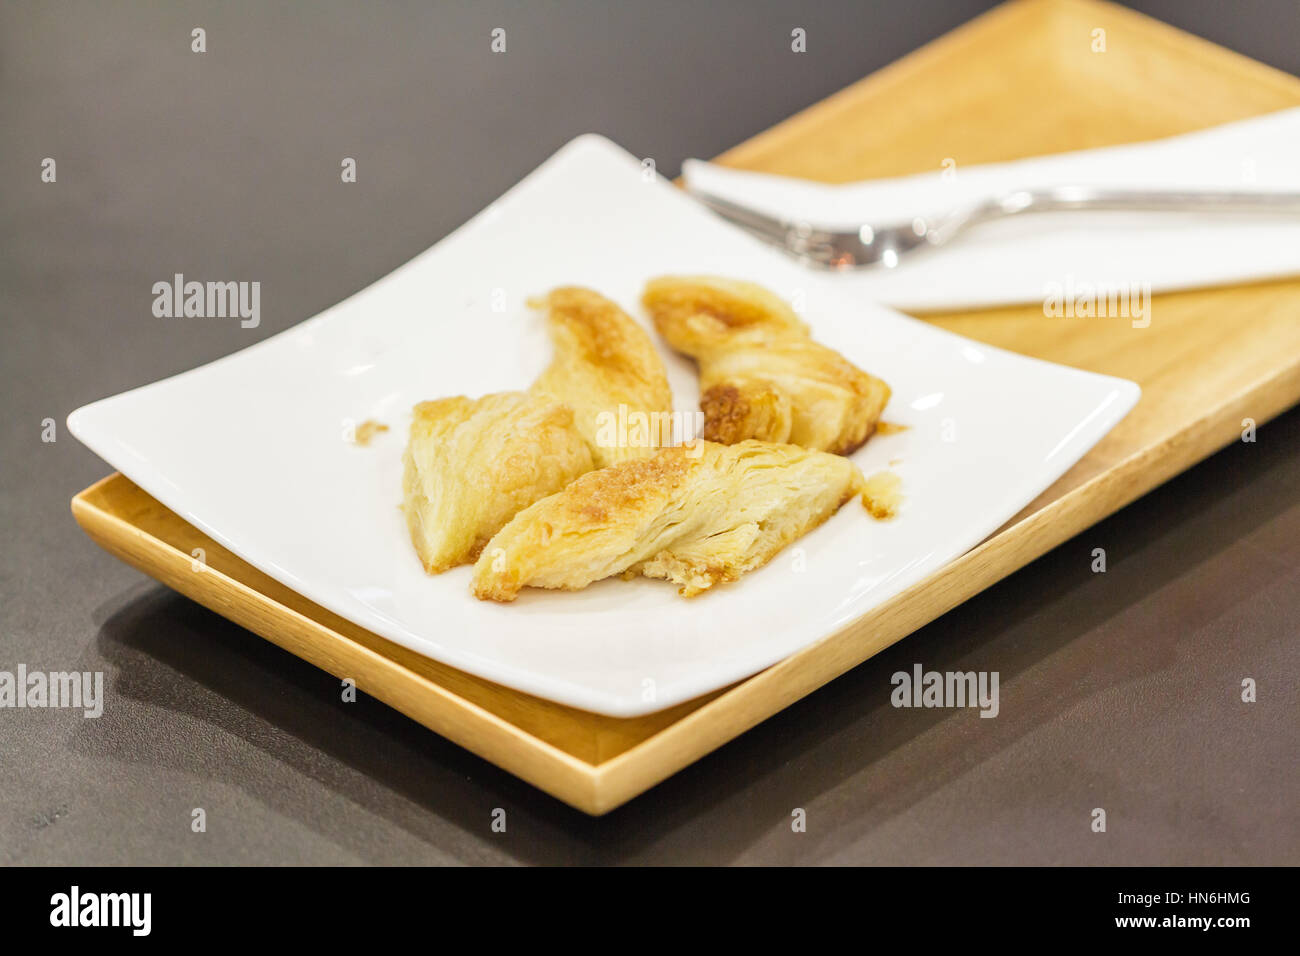 Bread baked cheese slightly salty on wood plate in restaurant. Stock Photo